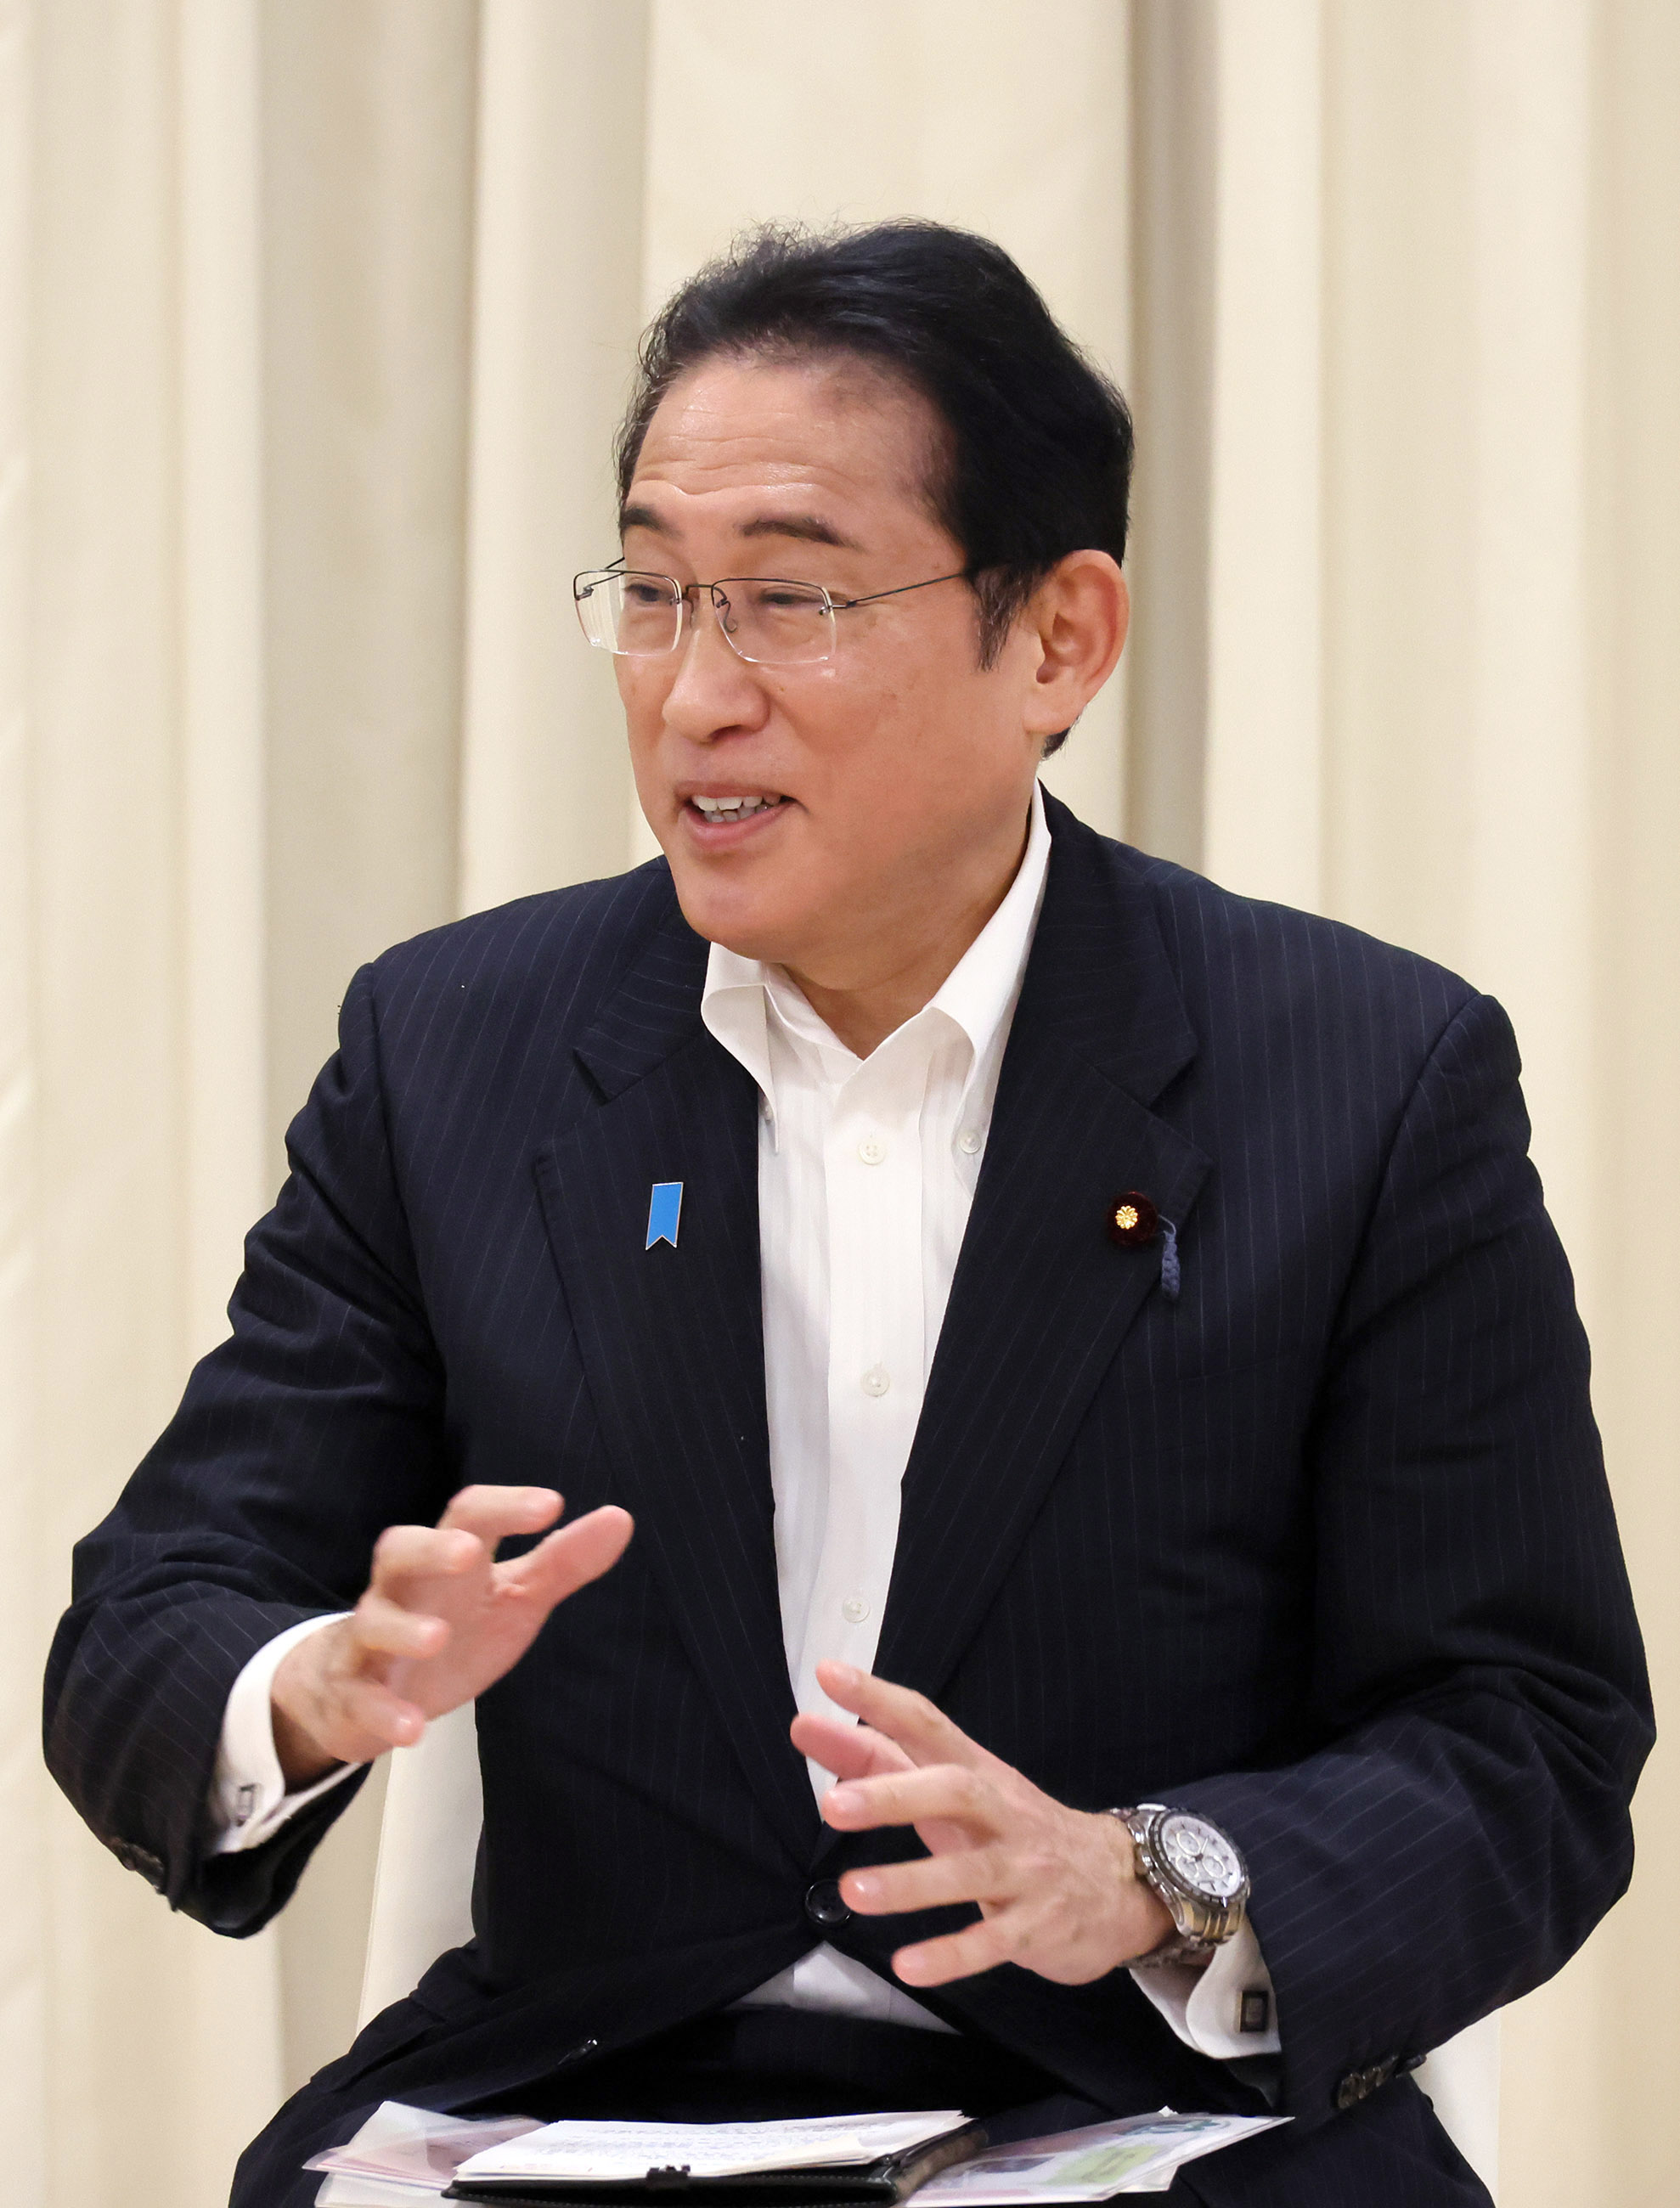 Prime Minister Kishida making remarks at the talk with a small group (4)